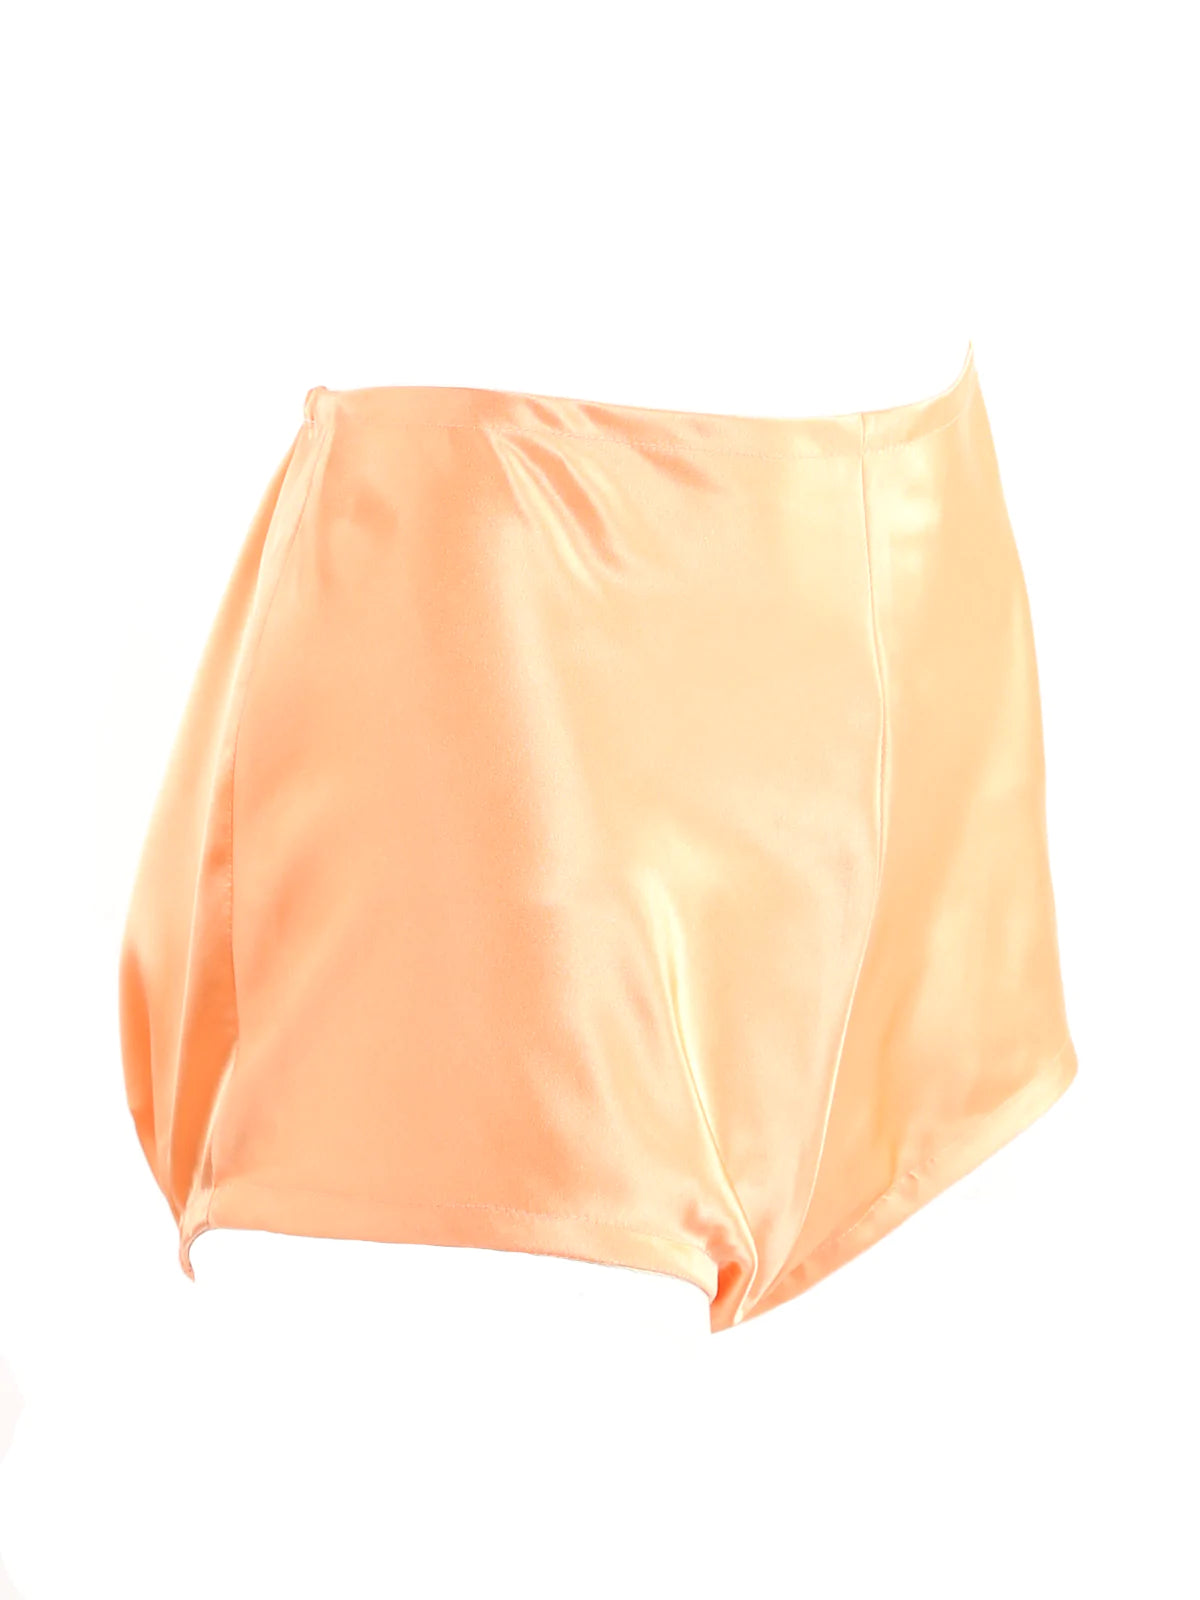 Assiette Satin Bloomers - Black and Peach - sizes S-5X